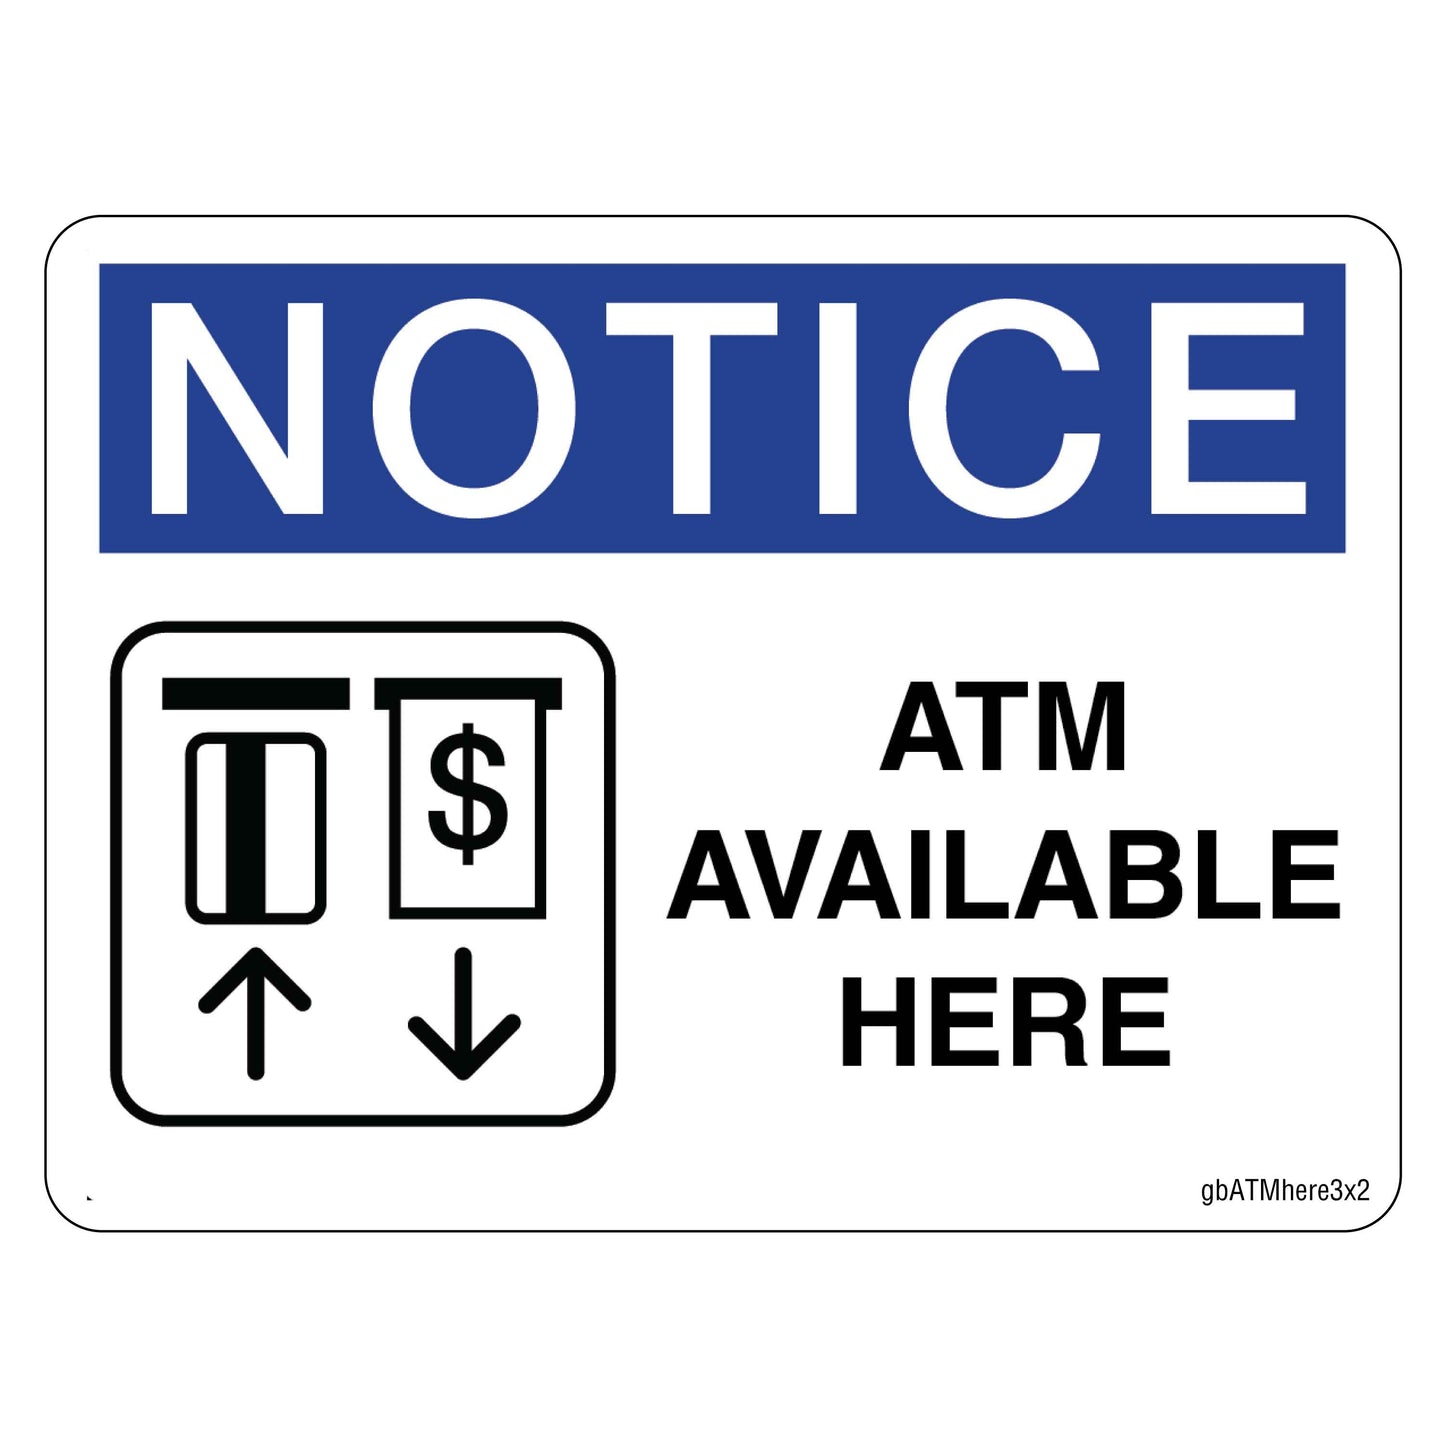 Notice ATM Available Here Decal. 4 inches by 3 inches in size. 